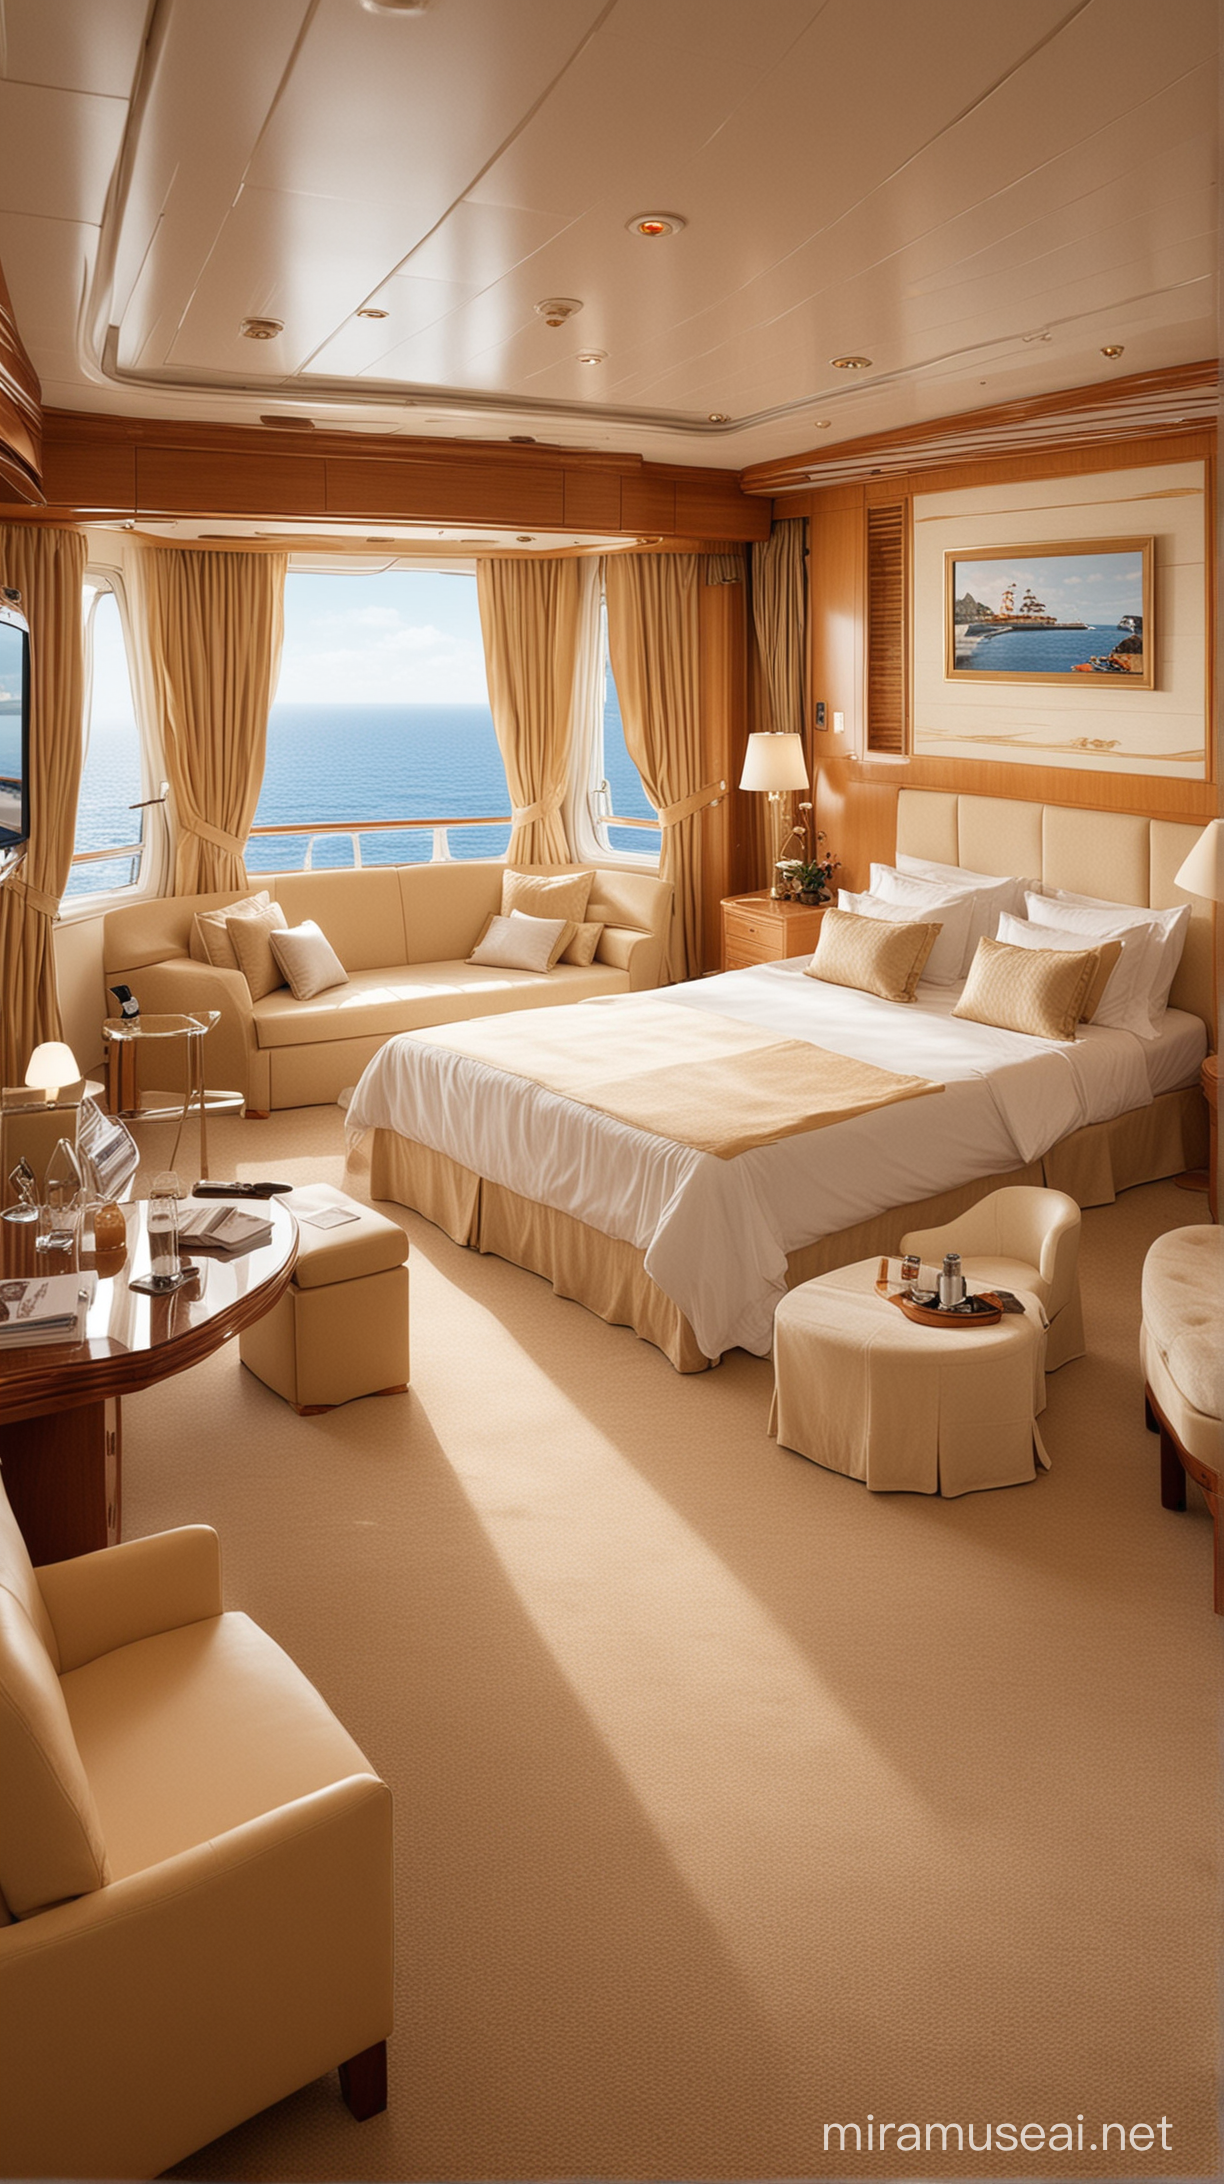 Luxurious Cruise Ship Cabin with Ocean View